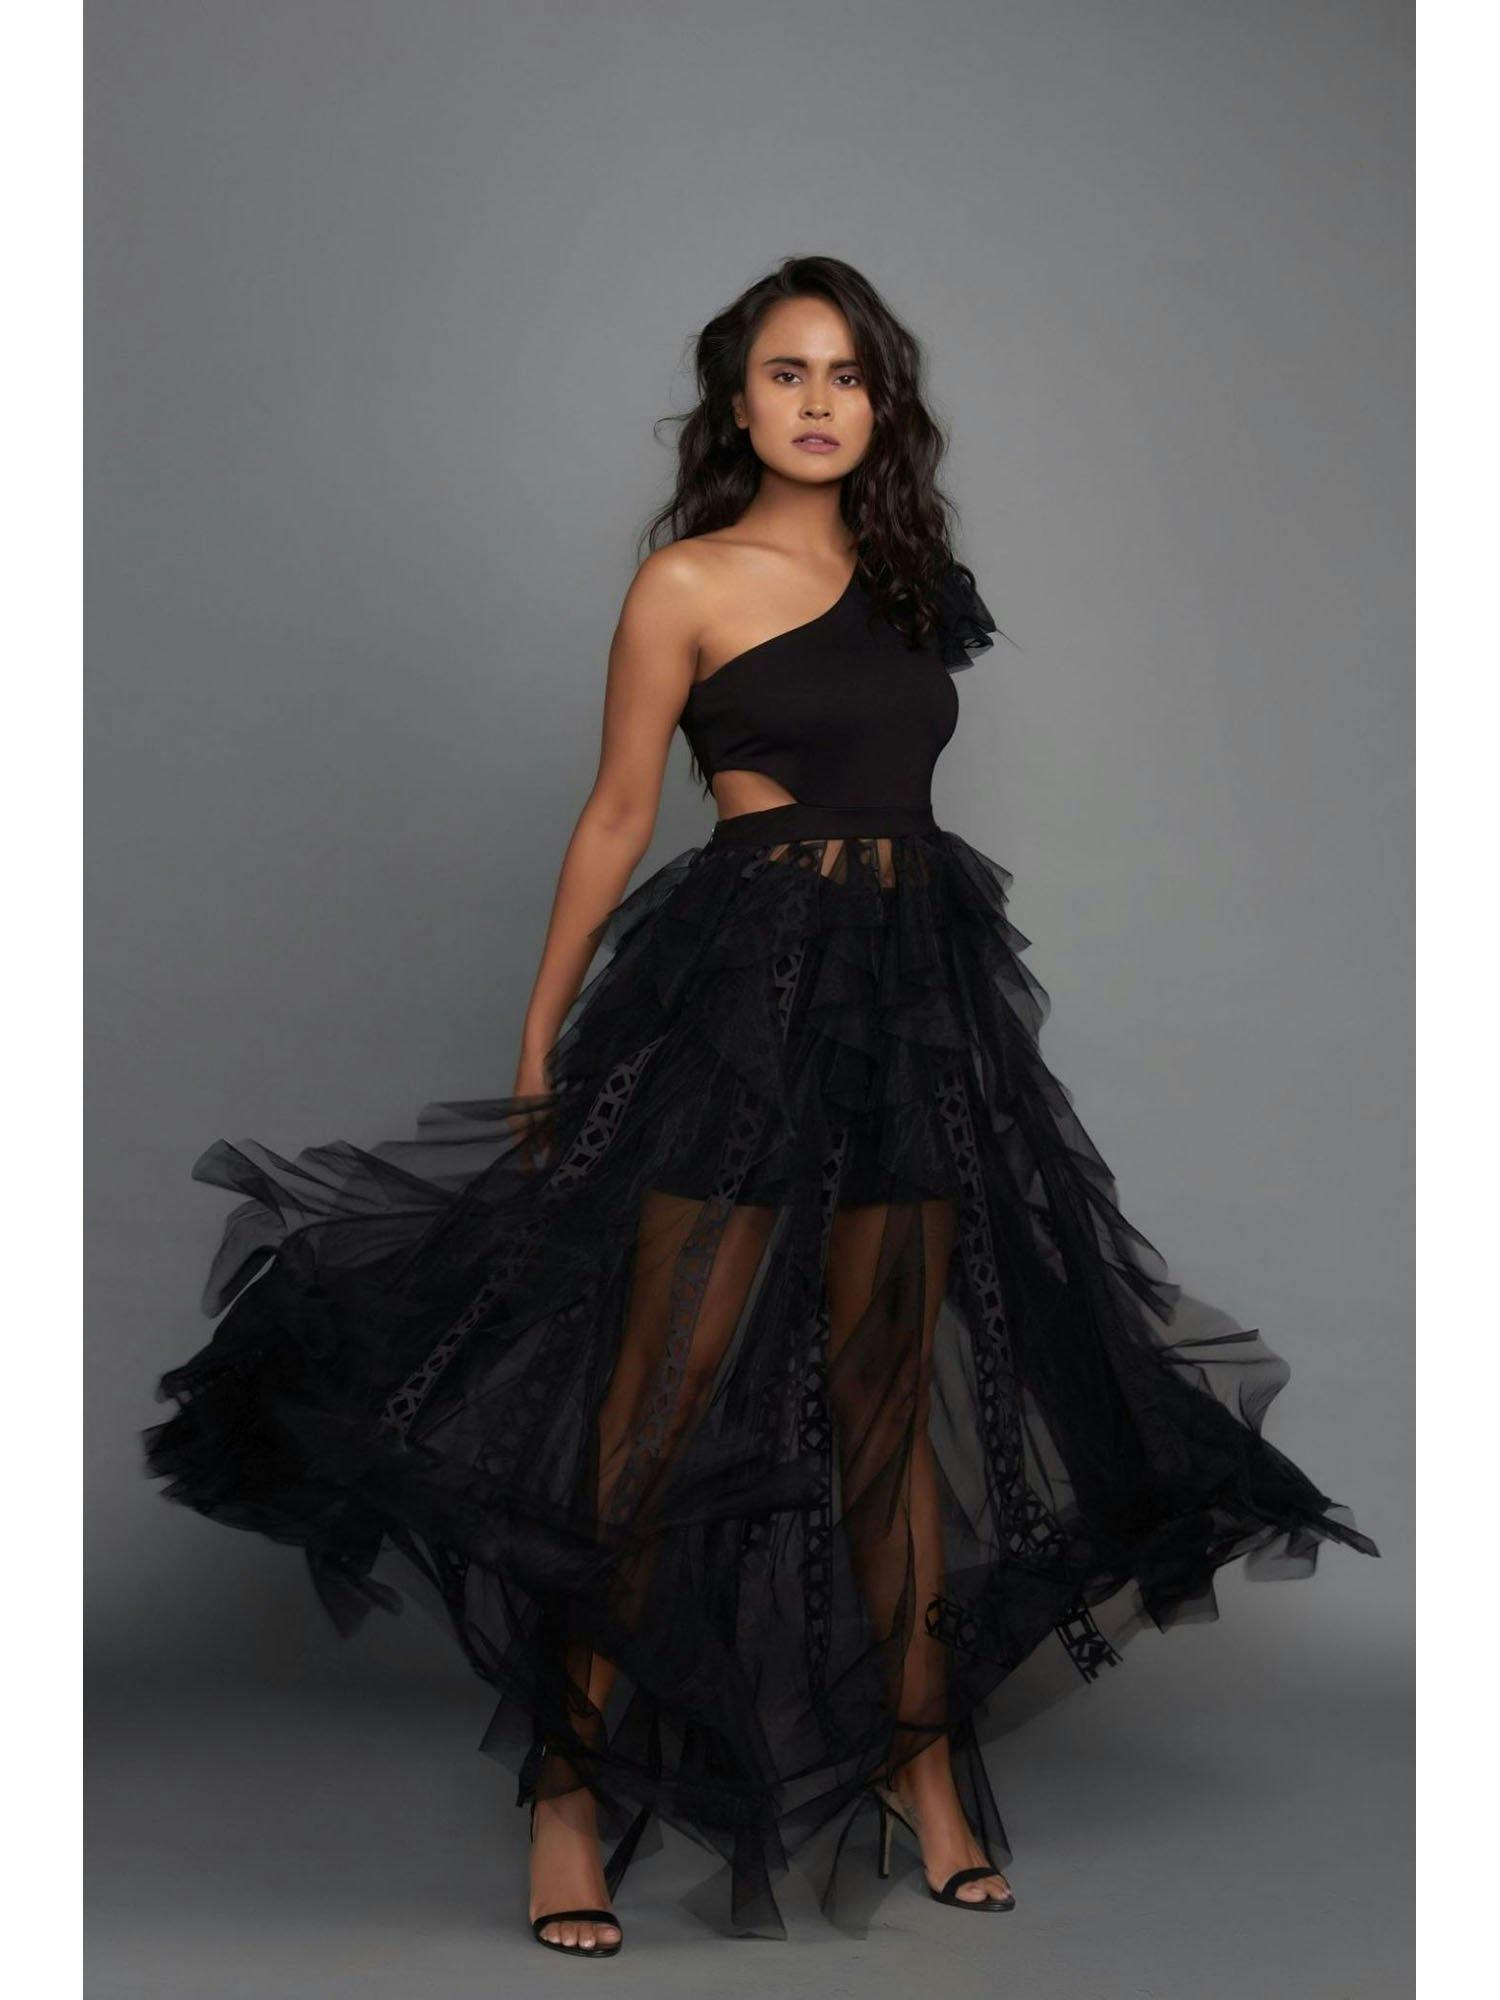 Black one shoulder dress with short skirt., a product by Deepika Arora